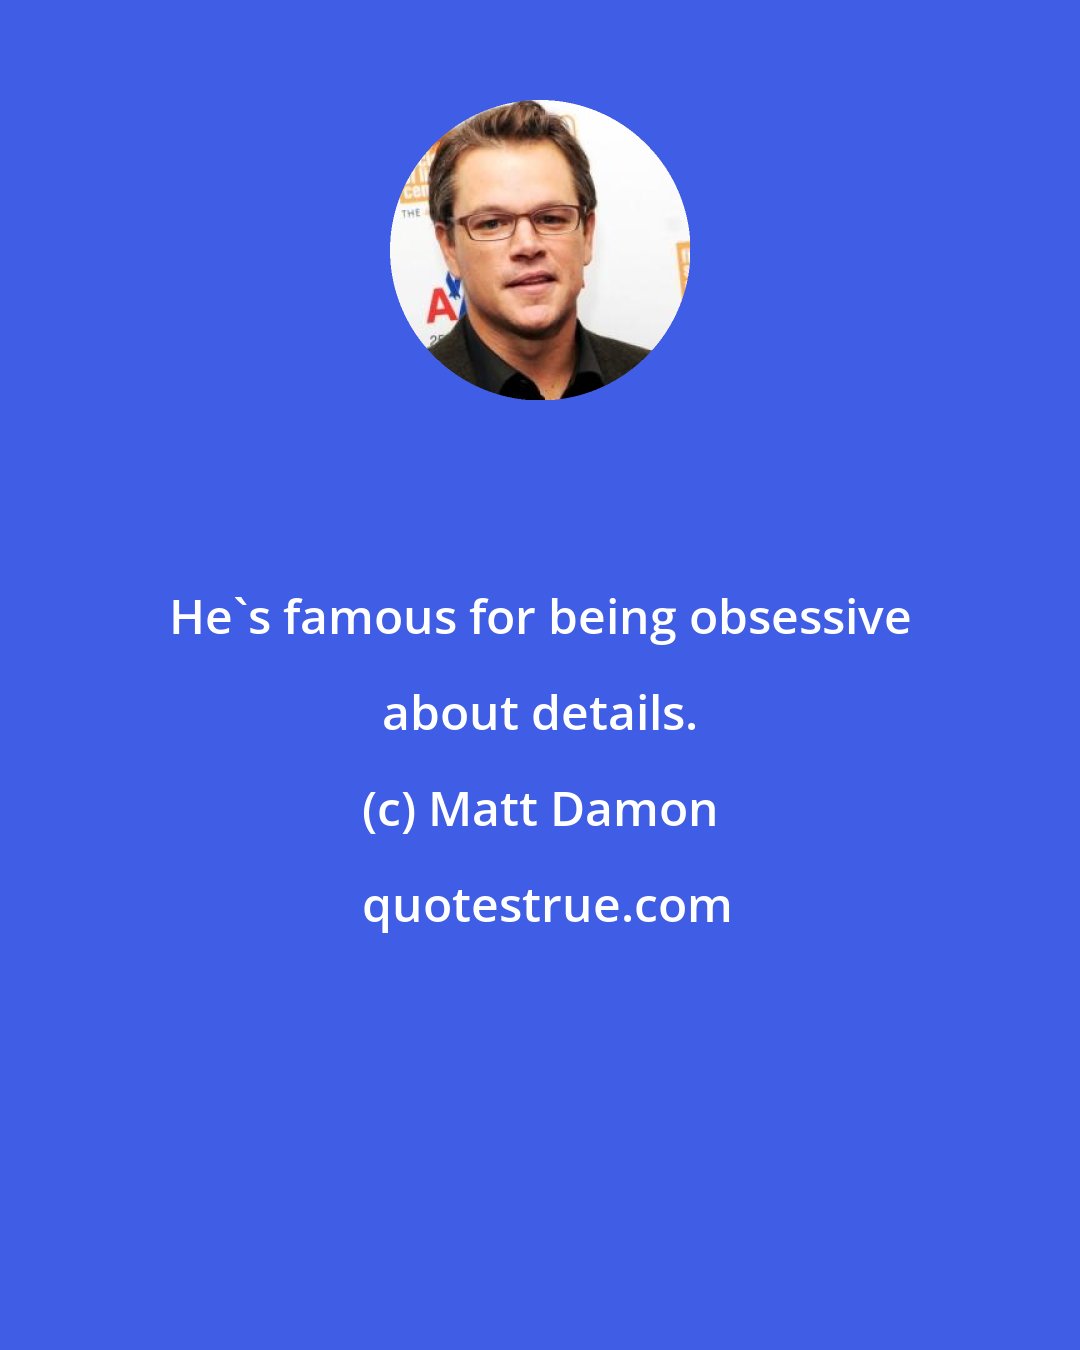 Matt Damon: He's famous for being obsessive about details.